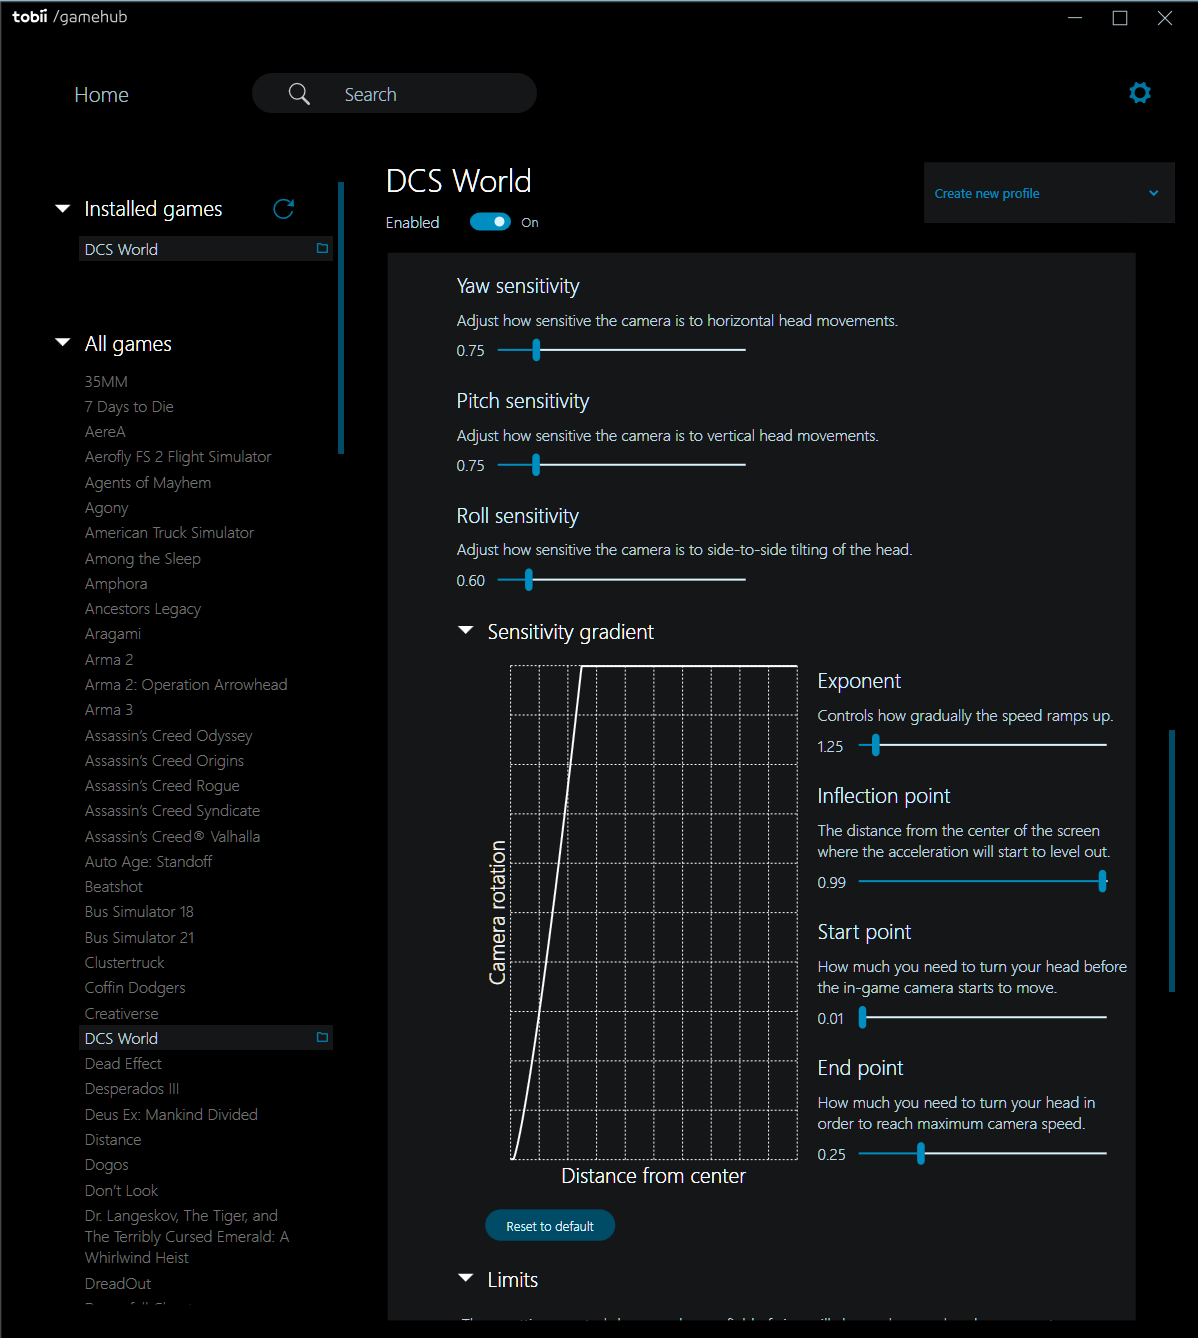 Share your Tobii Eyetracker 5 DCS settings - PC Hardware and